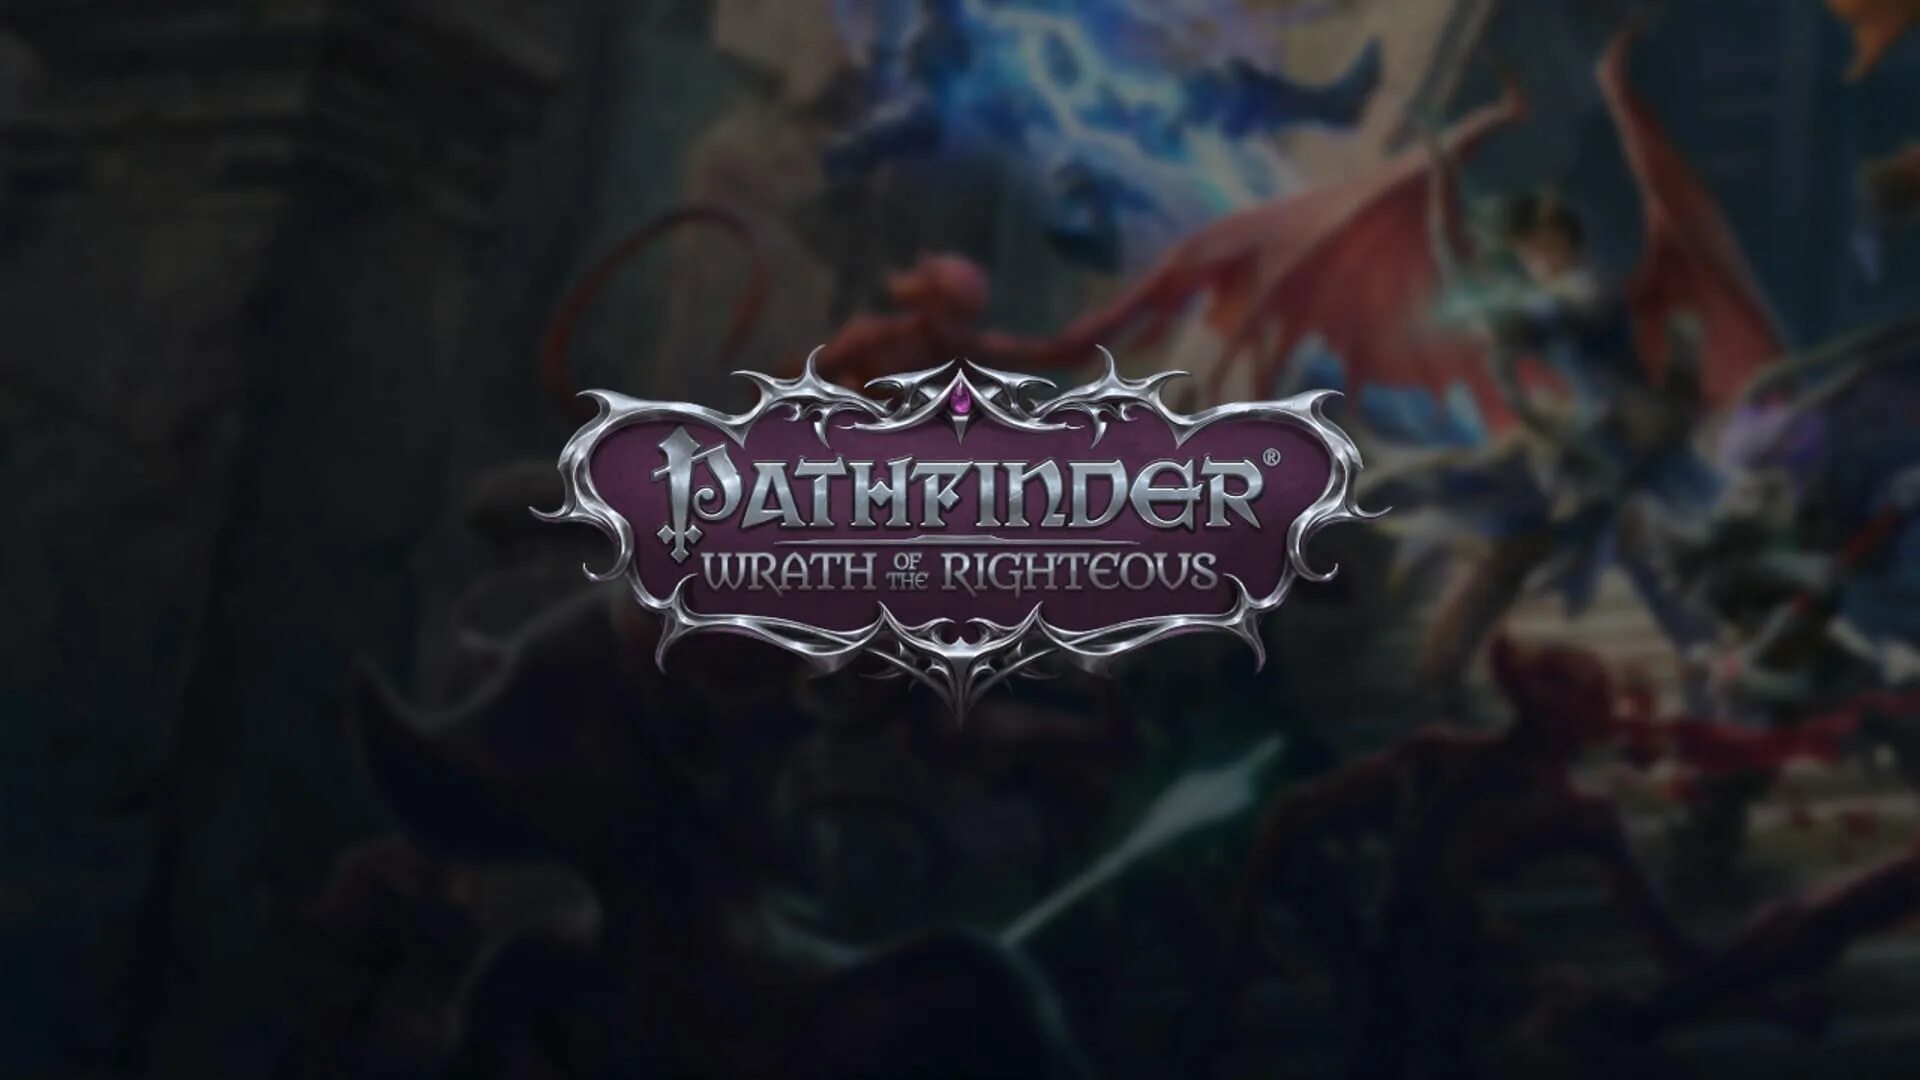 Pathfinder Wrath of the Righteous Камилия. Pathfinder 2021 игра. Pathfinder Wrath of the Righteous Королева Годфри. Pathfinder Wrath of the Righteous обложка. Камелия pathfinder wrath